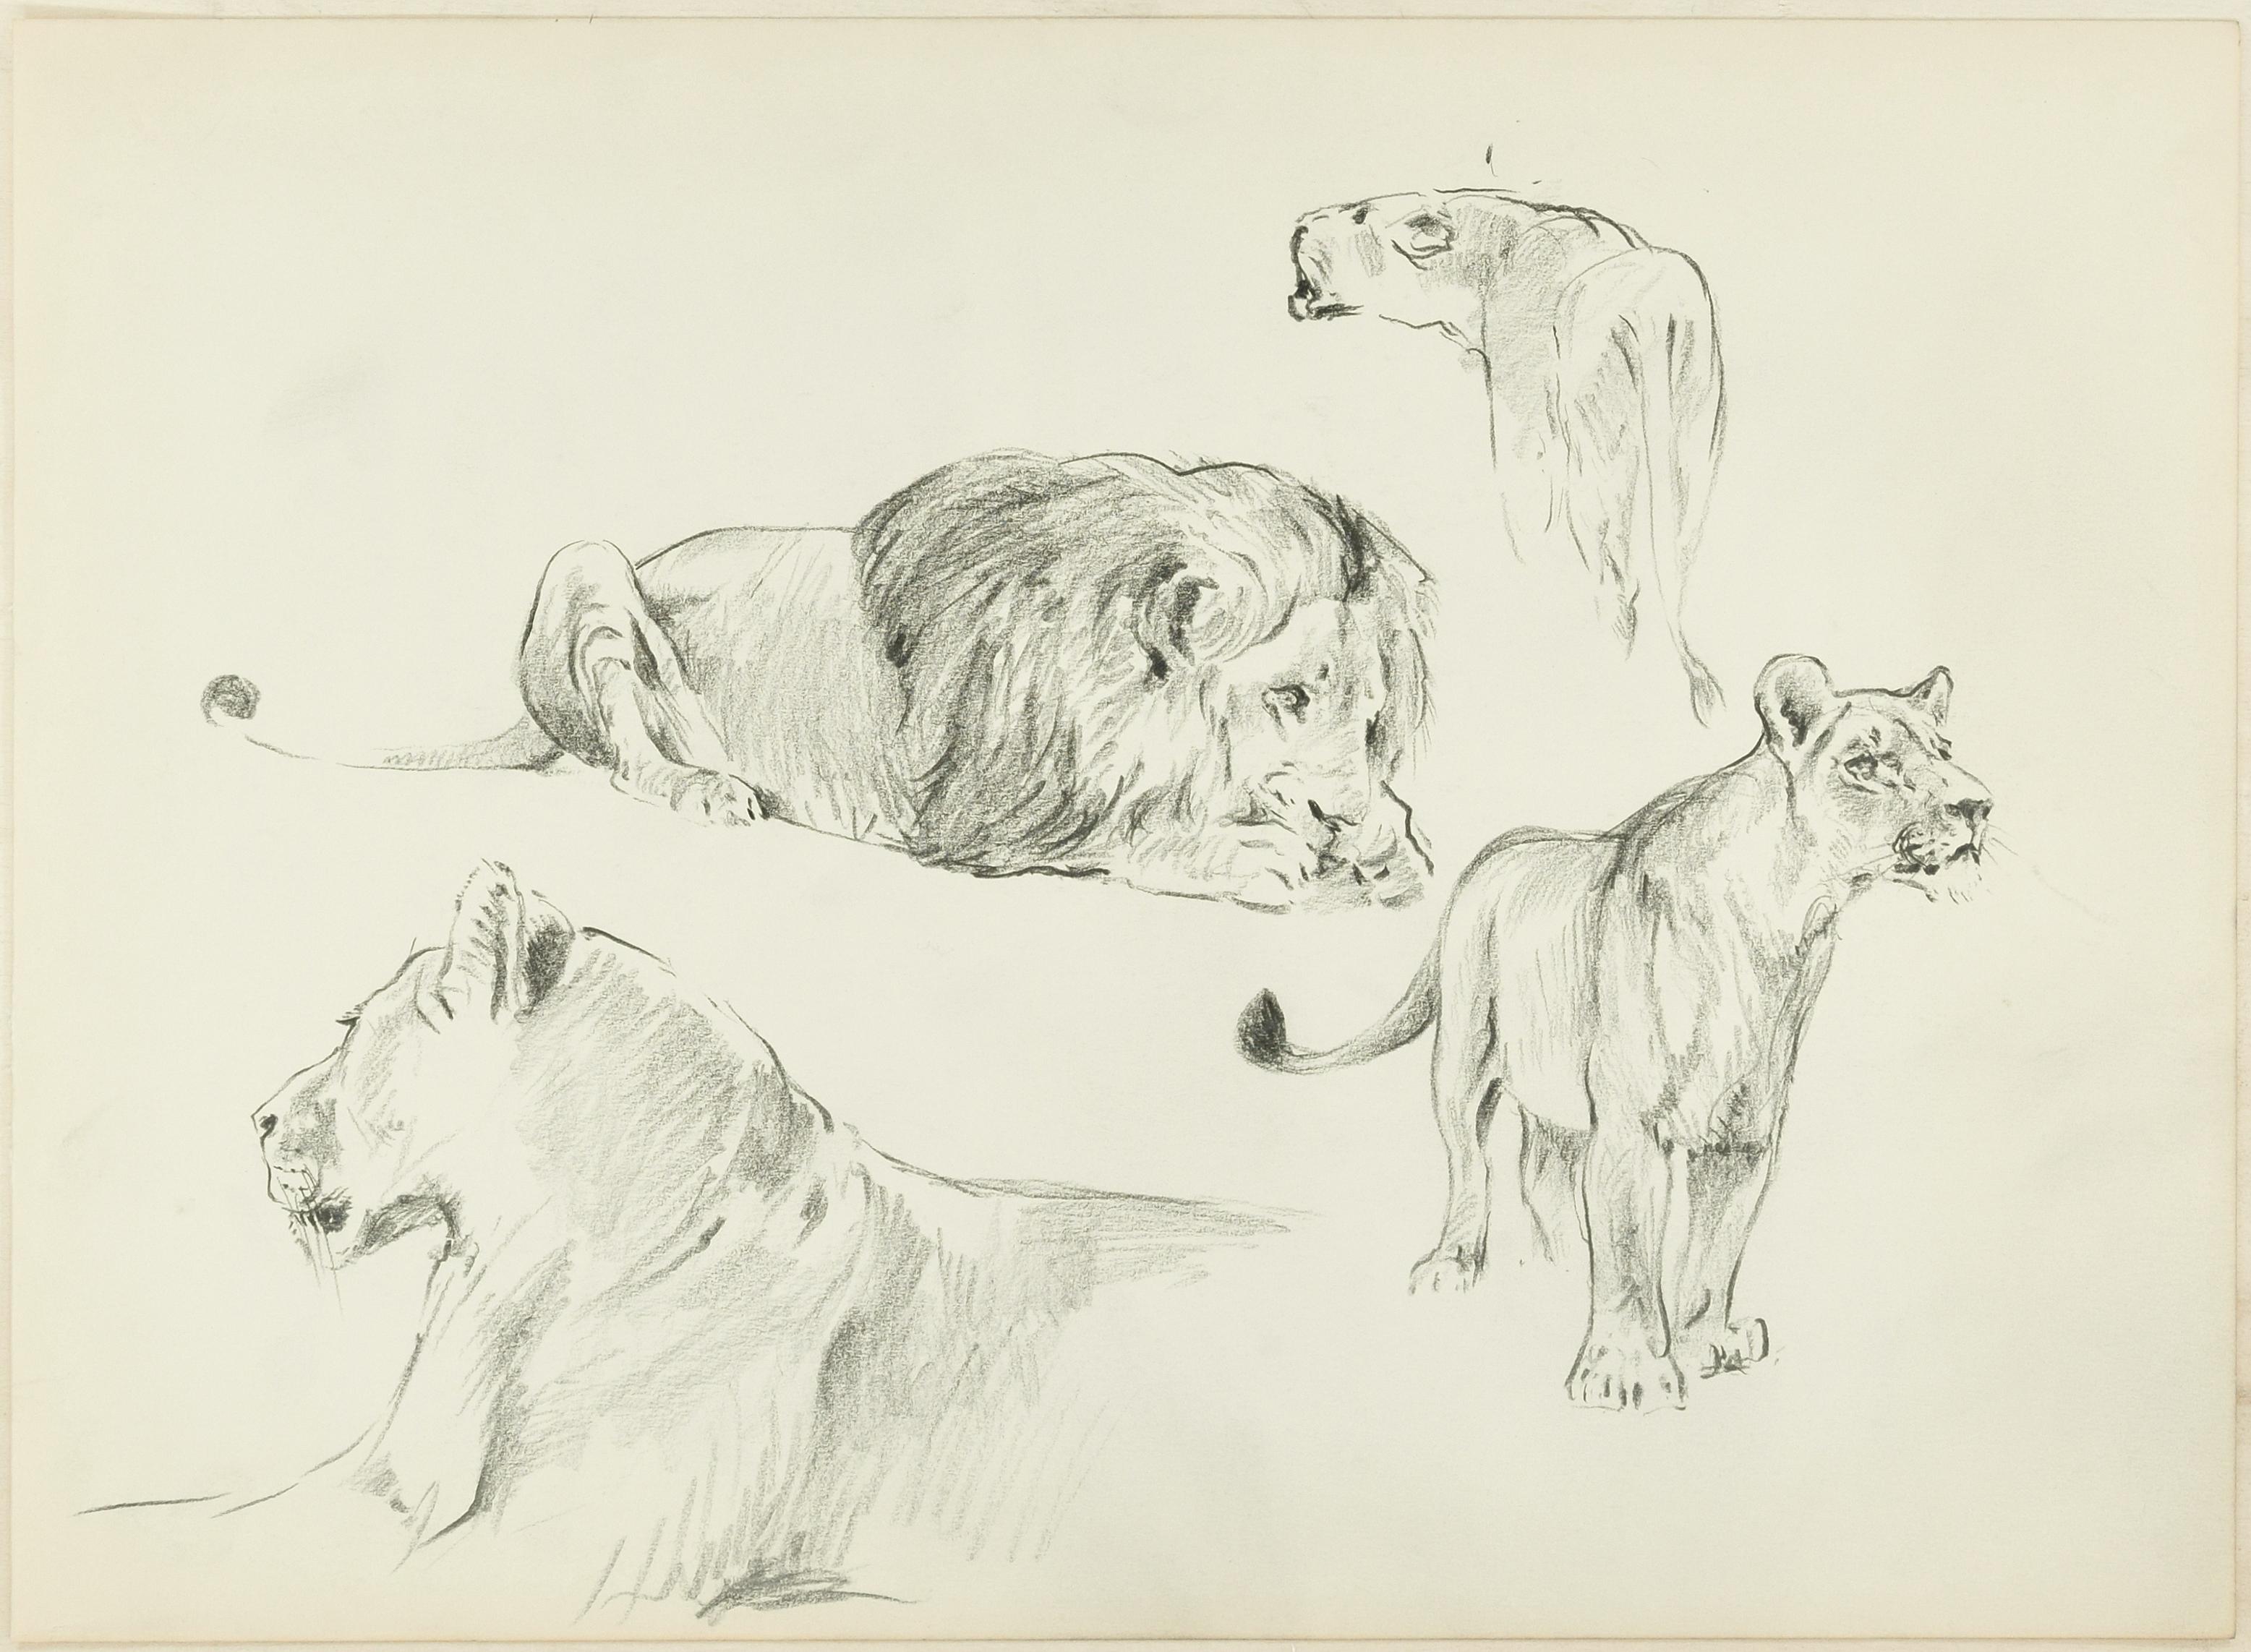 Study of Felines - Original Pencil Drawing by Willy Lorenz - 1950s